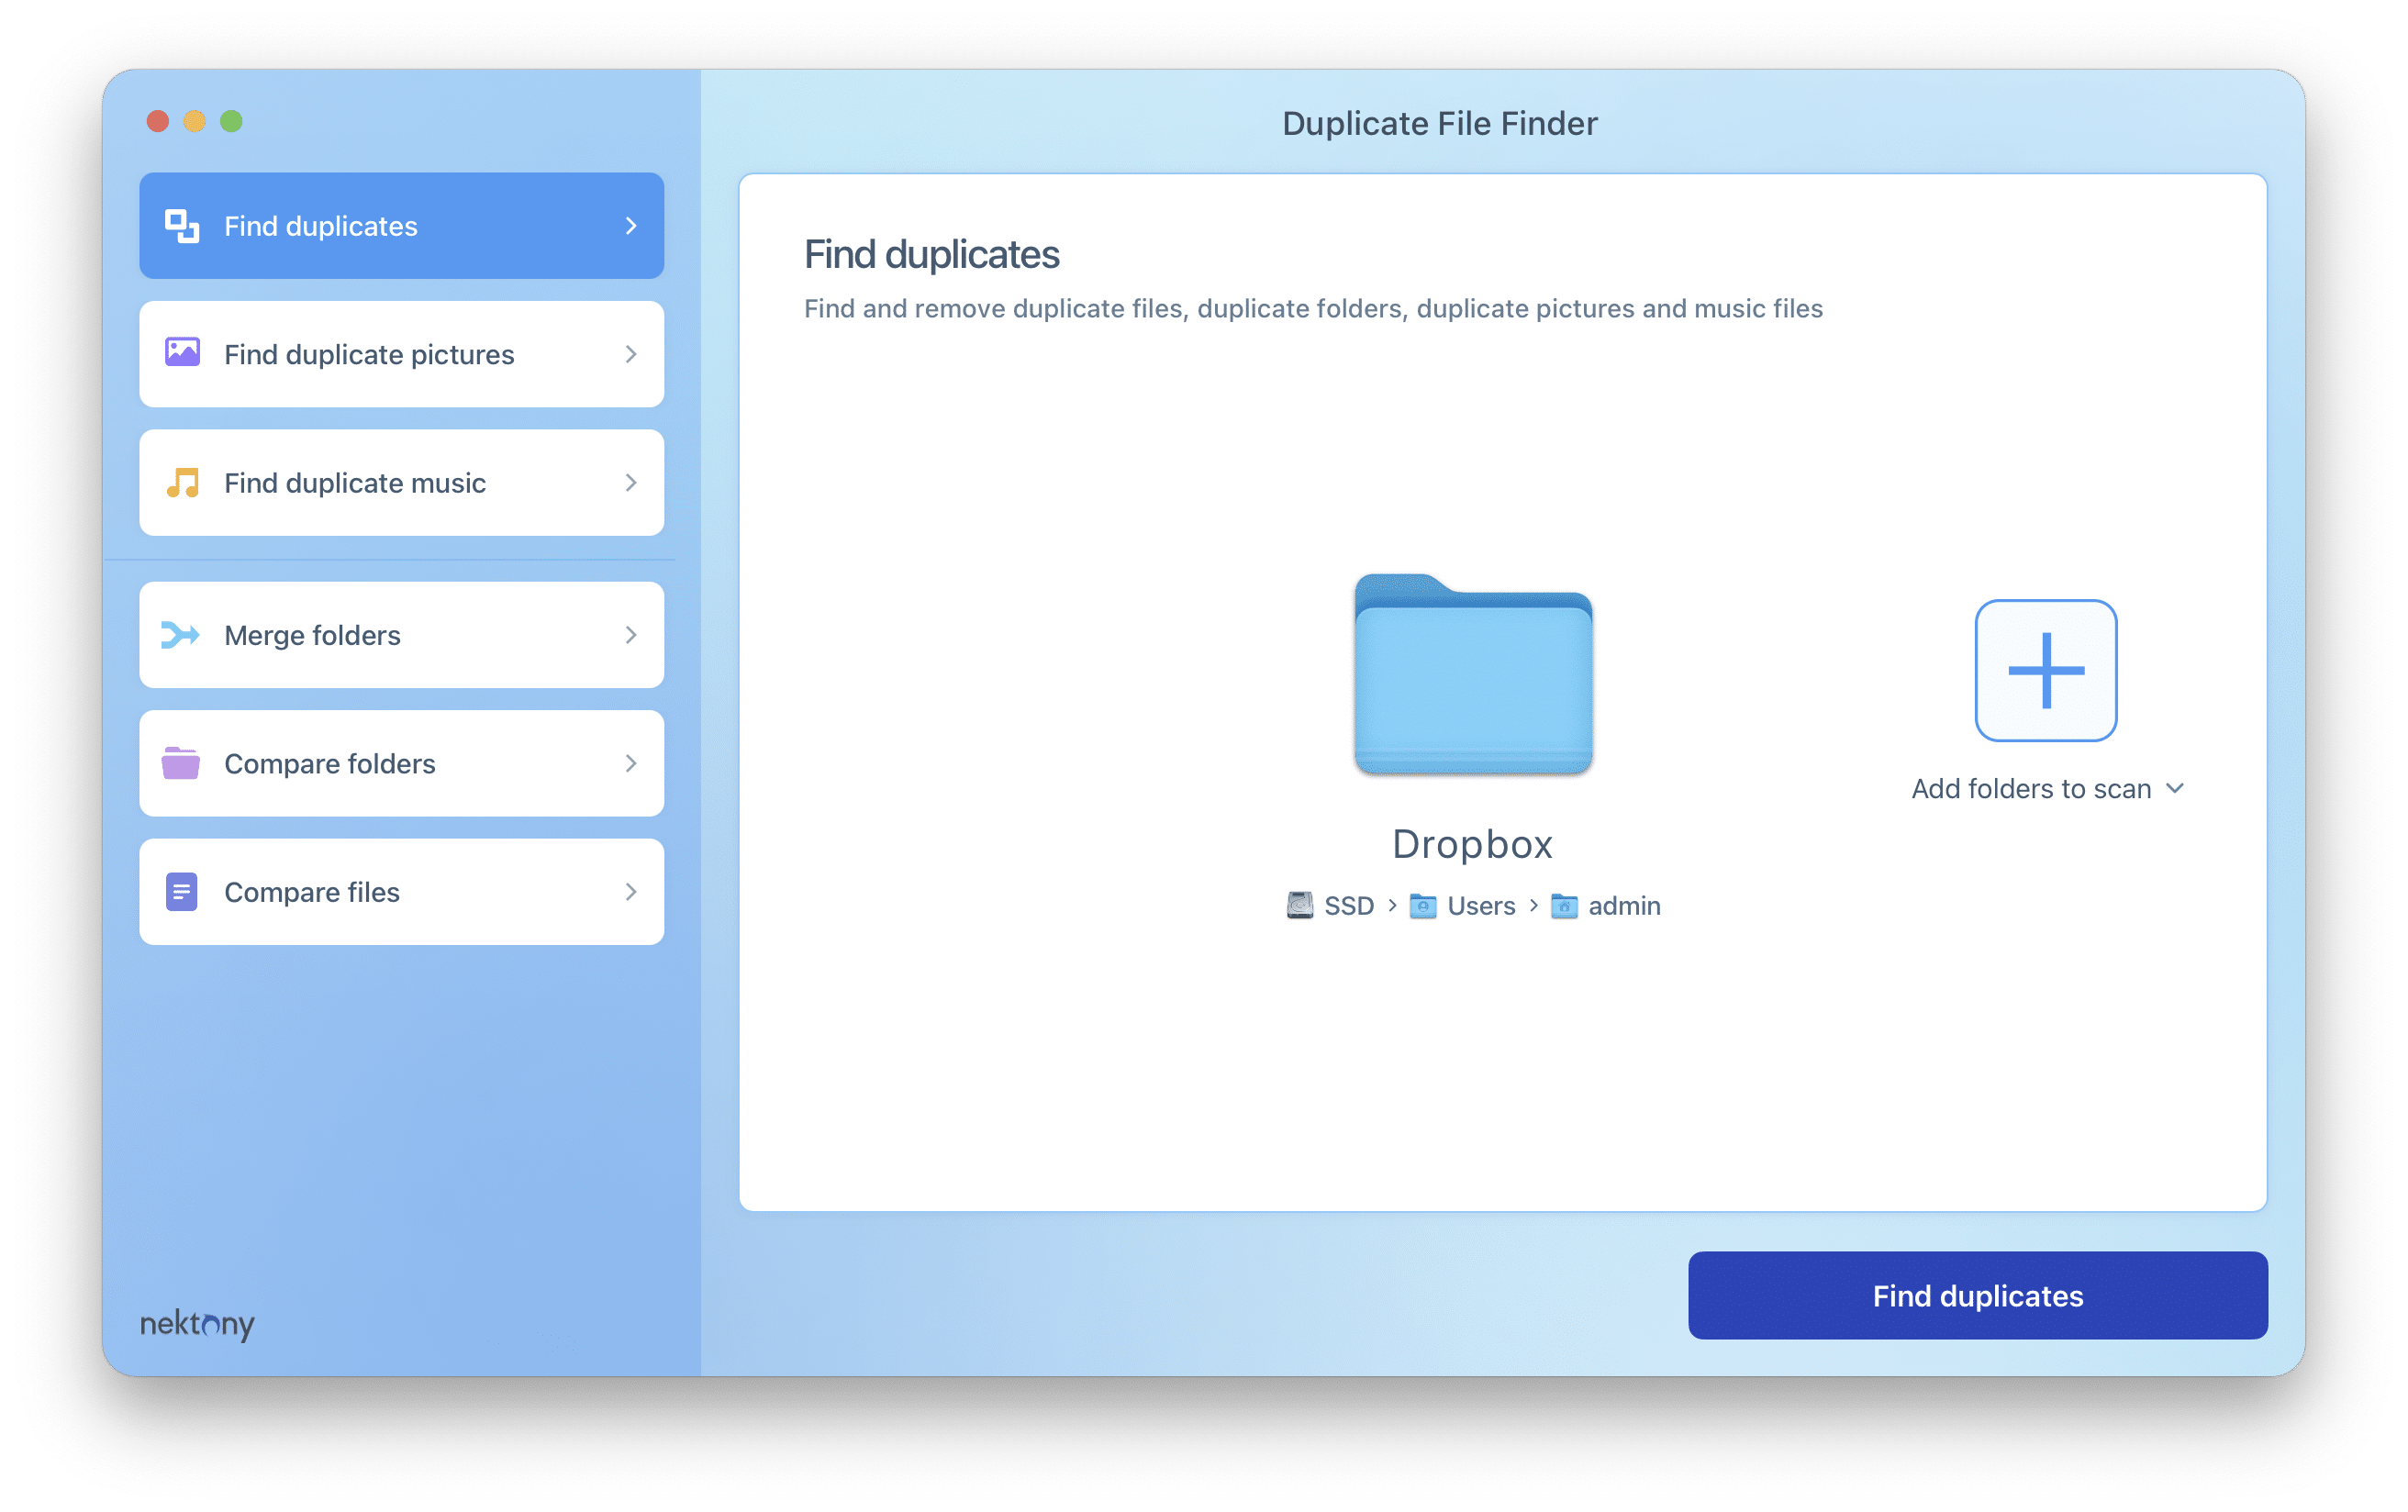 Duplicate File Finder start window with selected Dropbox folder